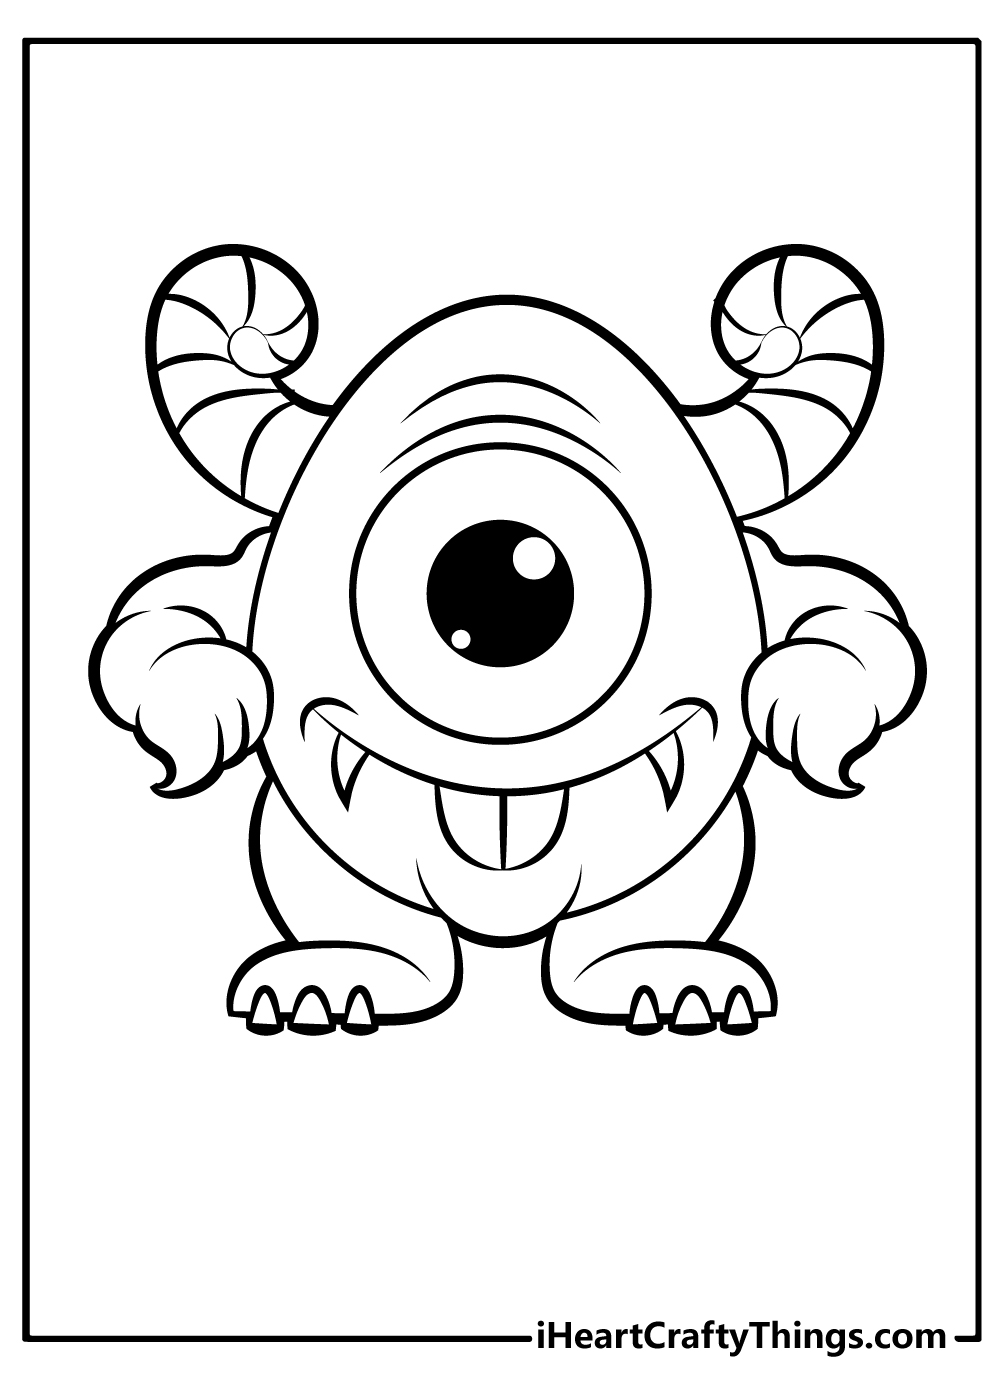 Monster Coloring Pages for kids free download